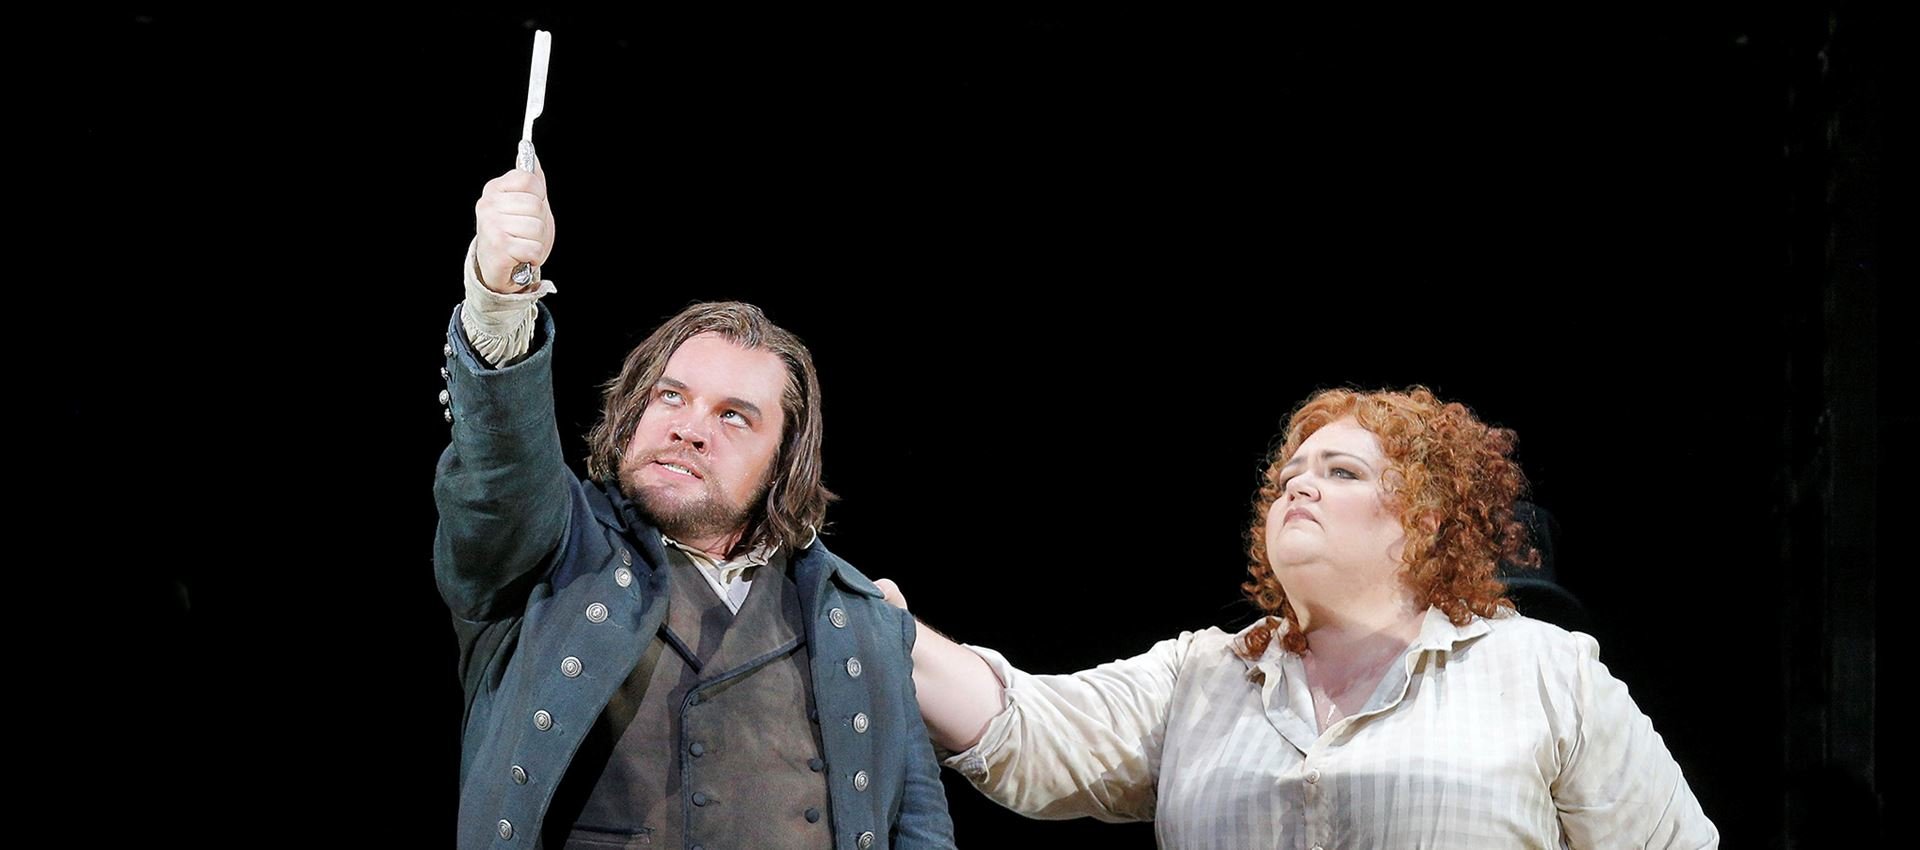 Sweeney Todd is holding up a knife while a woman has her hand on his shoulder